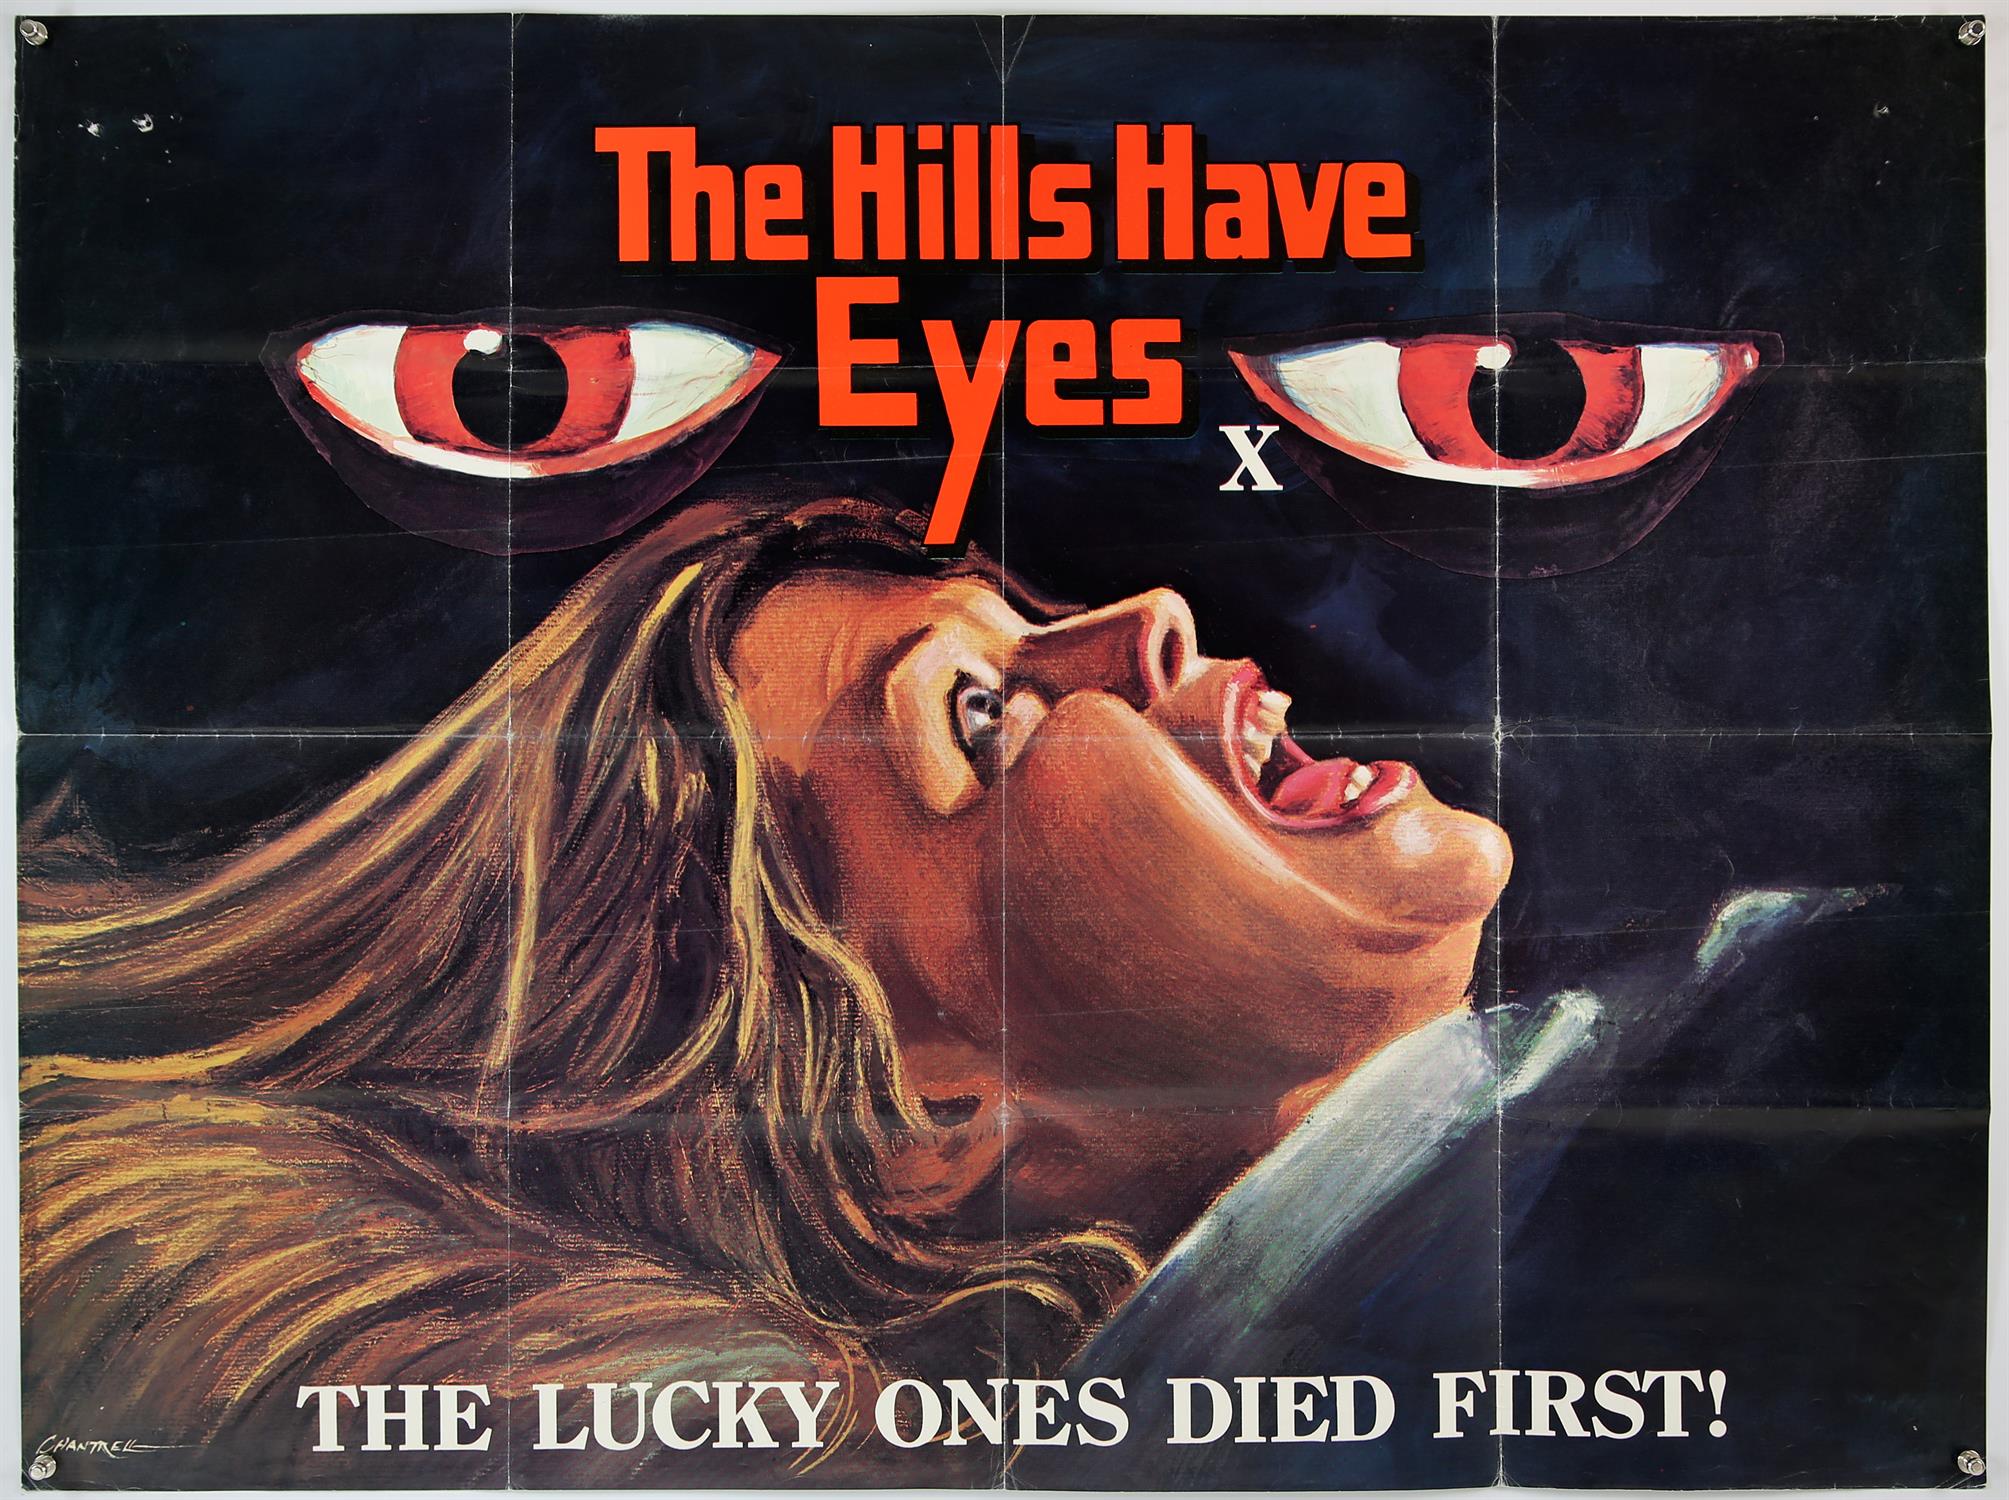 The Hills Have Eyes (1977) British Quad film poster, directed by Wes Craven, artwork by Tom